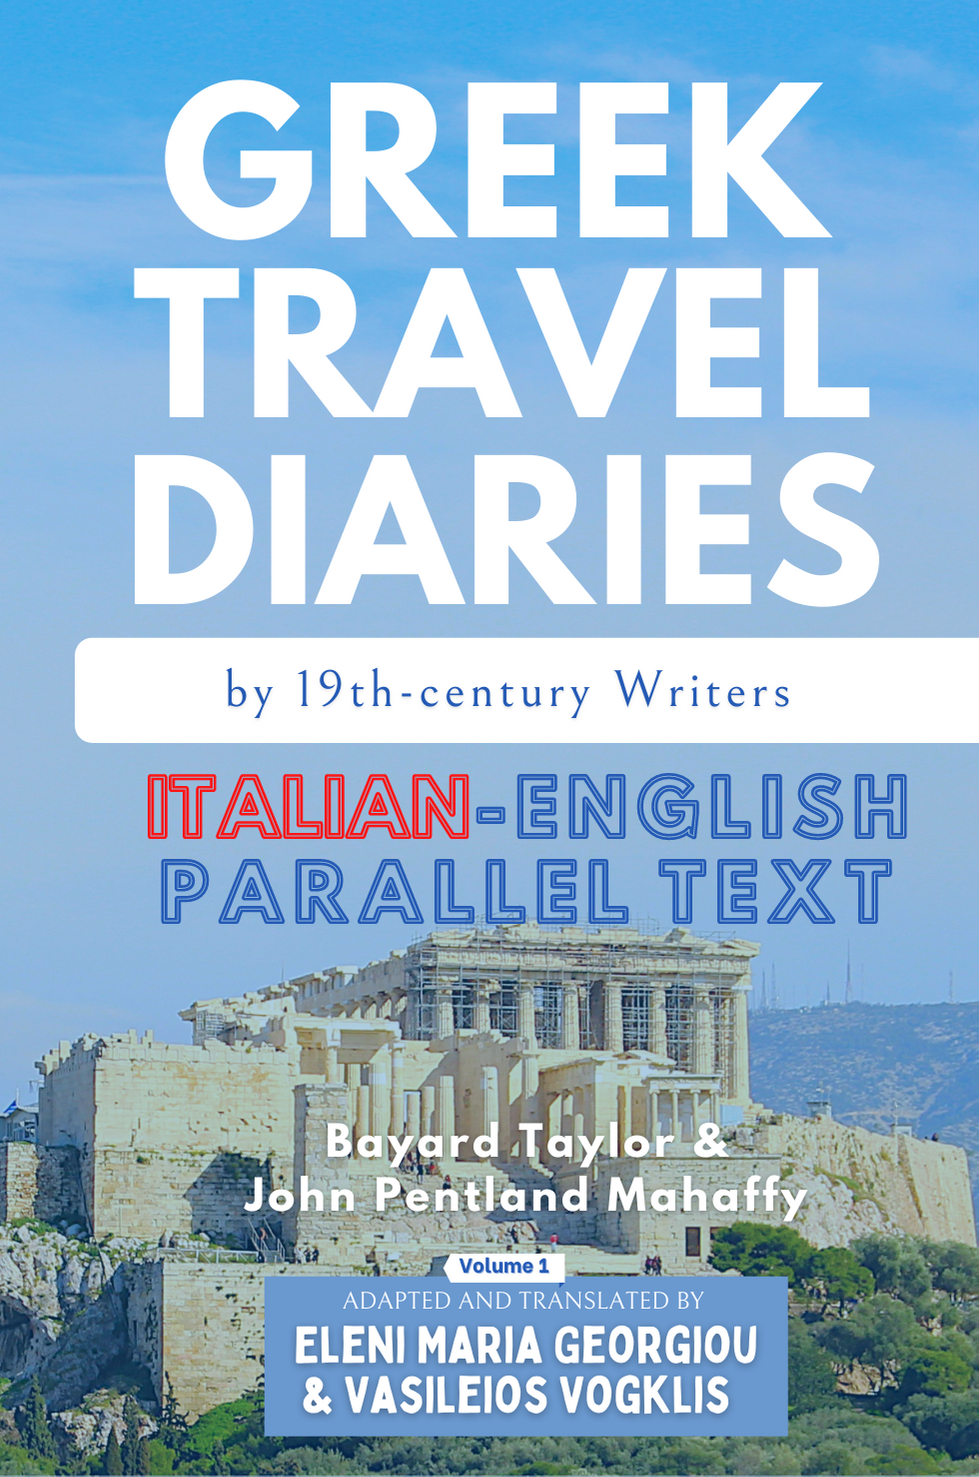 Greek Travel Diaries by 19th-century Writers: Italian-English Parallel Text Volume 1